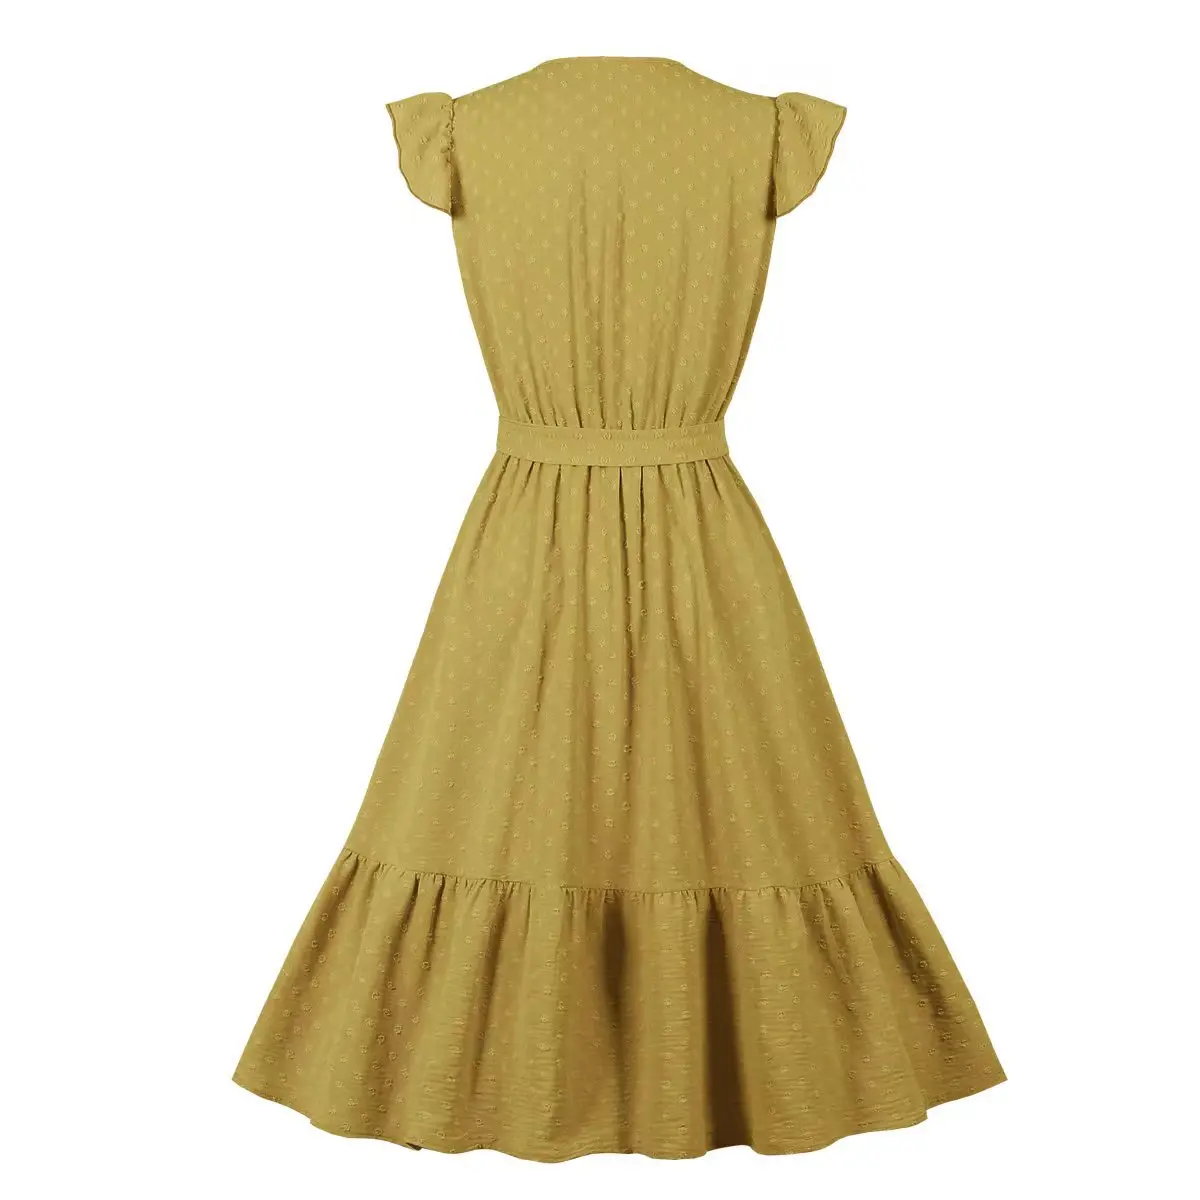 Wellwits Womens Summer Ruffle Frill Yellow Check Vintage Dress with Pocket 